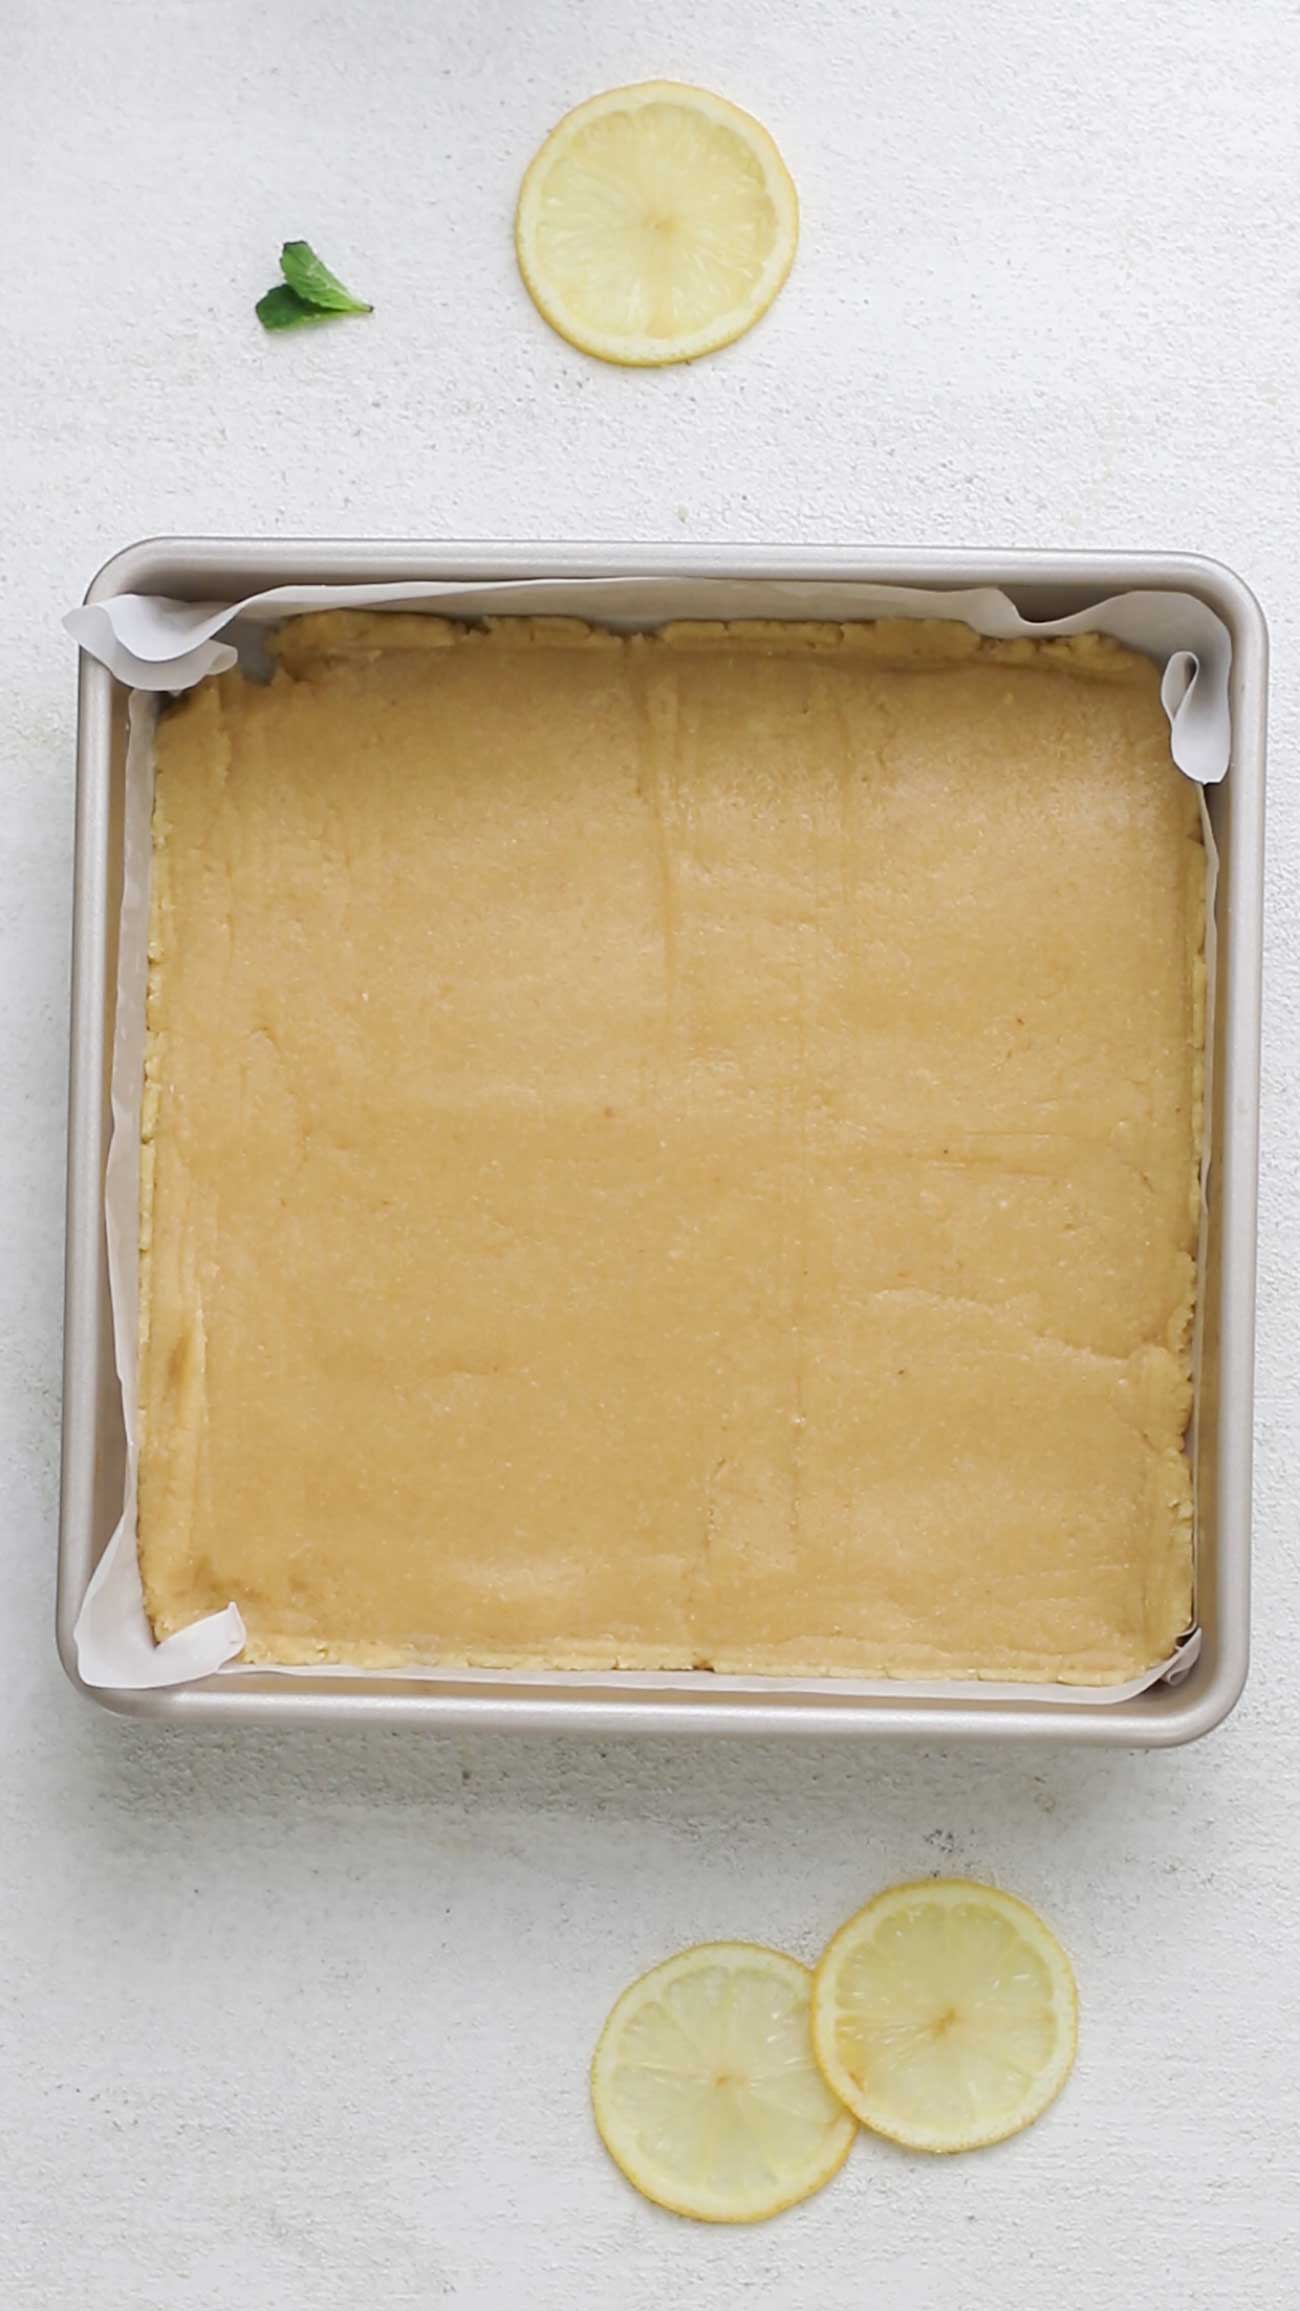 Shortbread crust pressed in a flat layer in a baking pan.